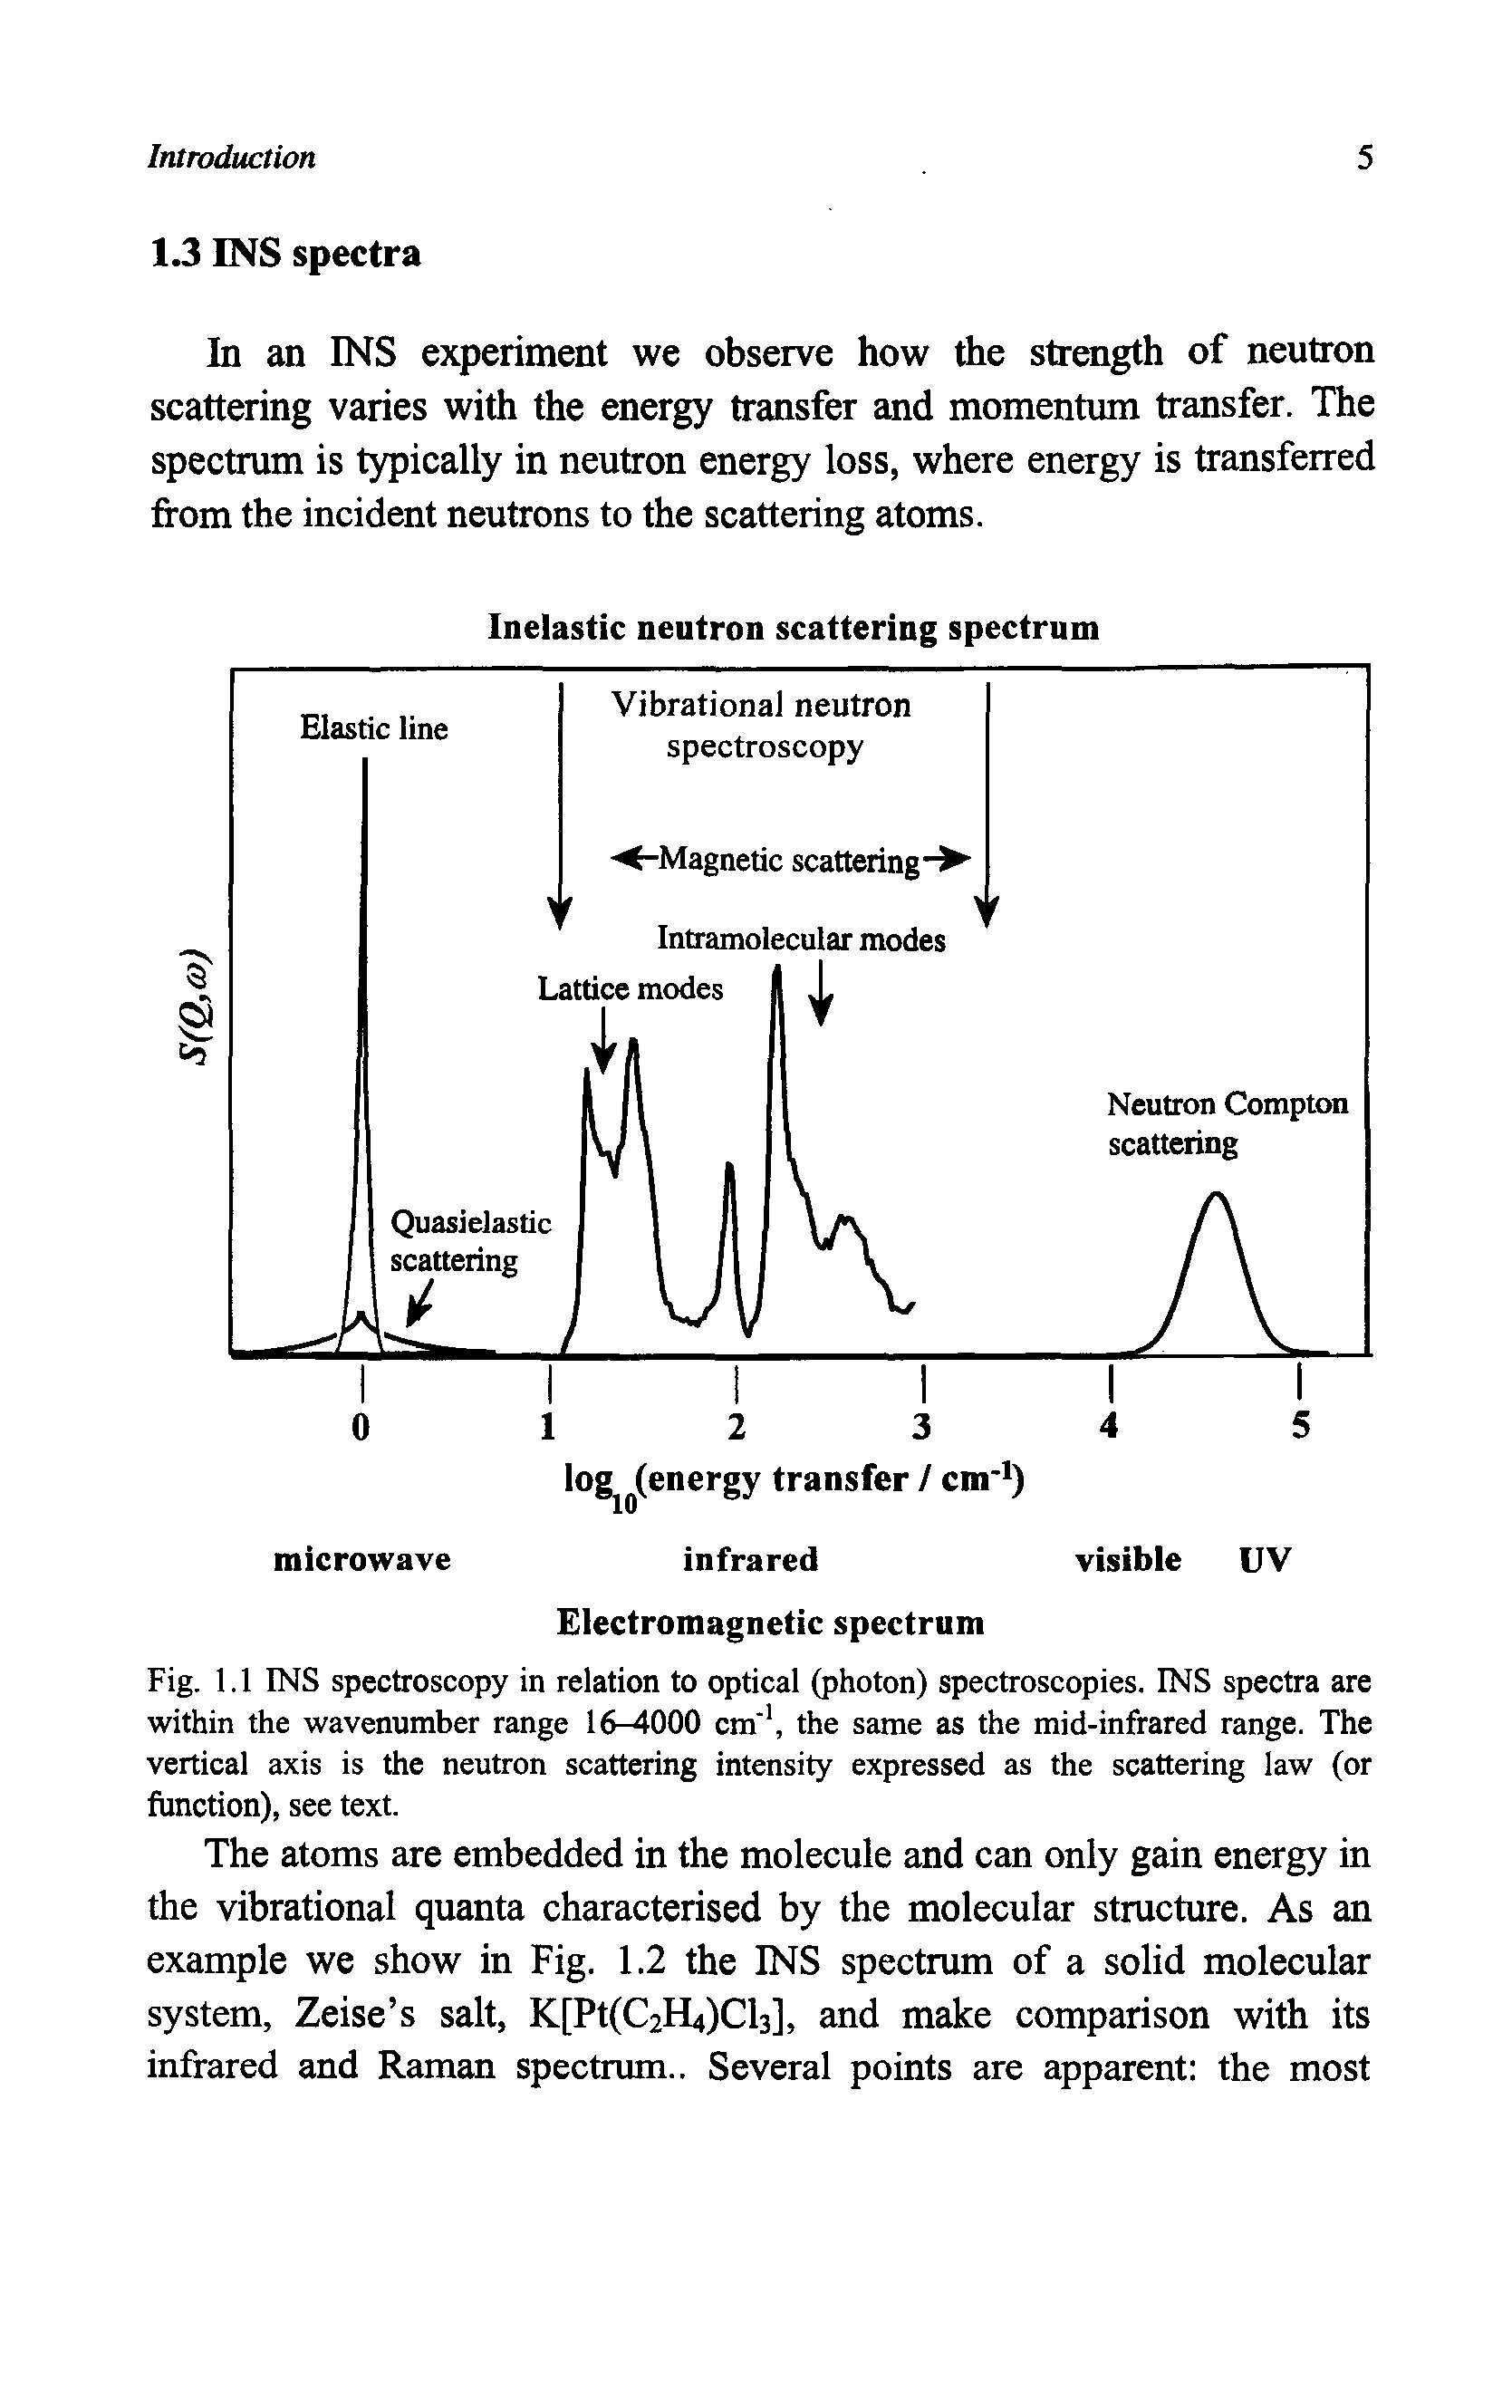 Fig. 1.1 INS spectroscopy in relation to optical (photon) spectroscopies. INS spectra are within the wavenumber range 16-4000 cm", the same as the mid-infrared range. The vertical axis is the neutron scattering intensity expressed as the scattering law (or function), see text.